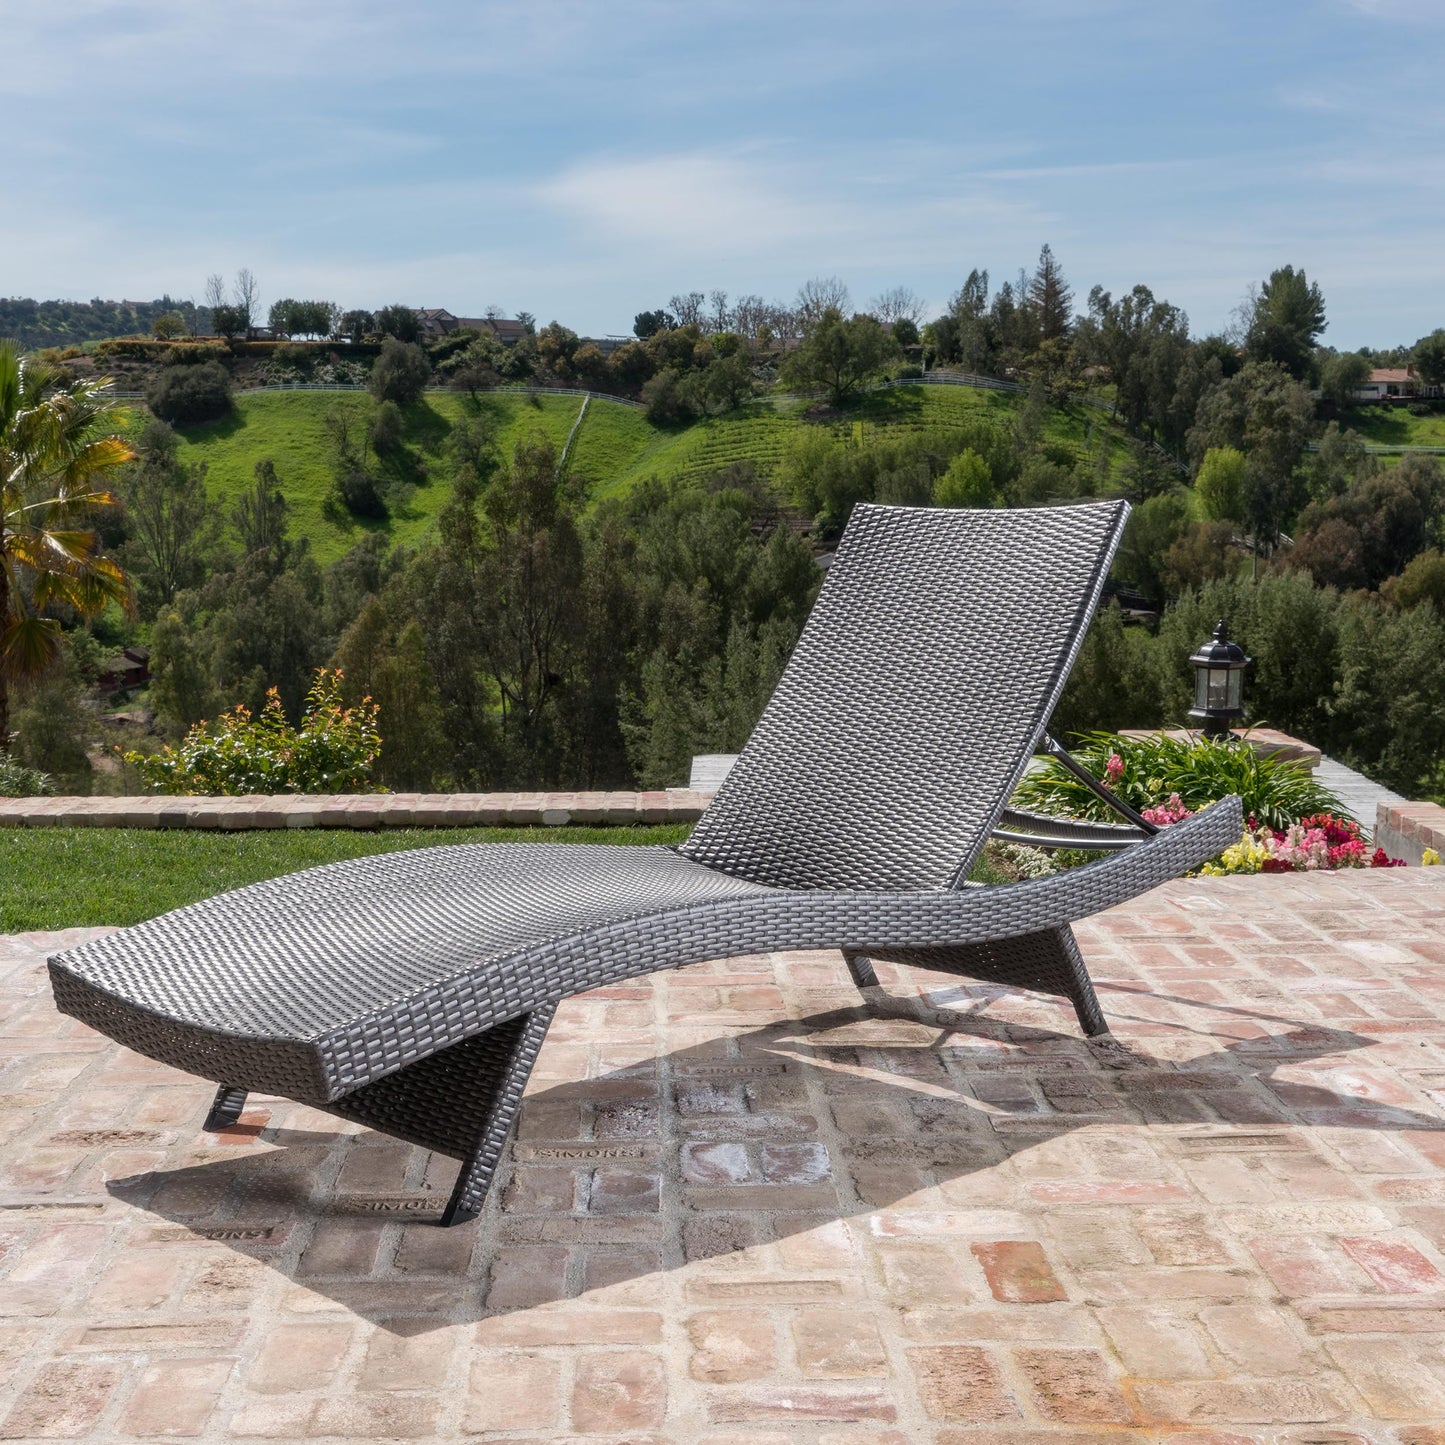 Savana Outdoor Patio Wicker Lounge with Cover